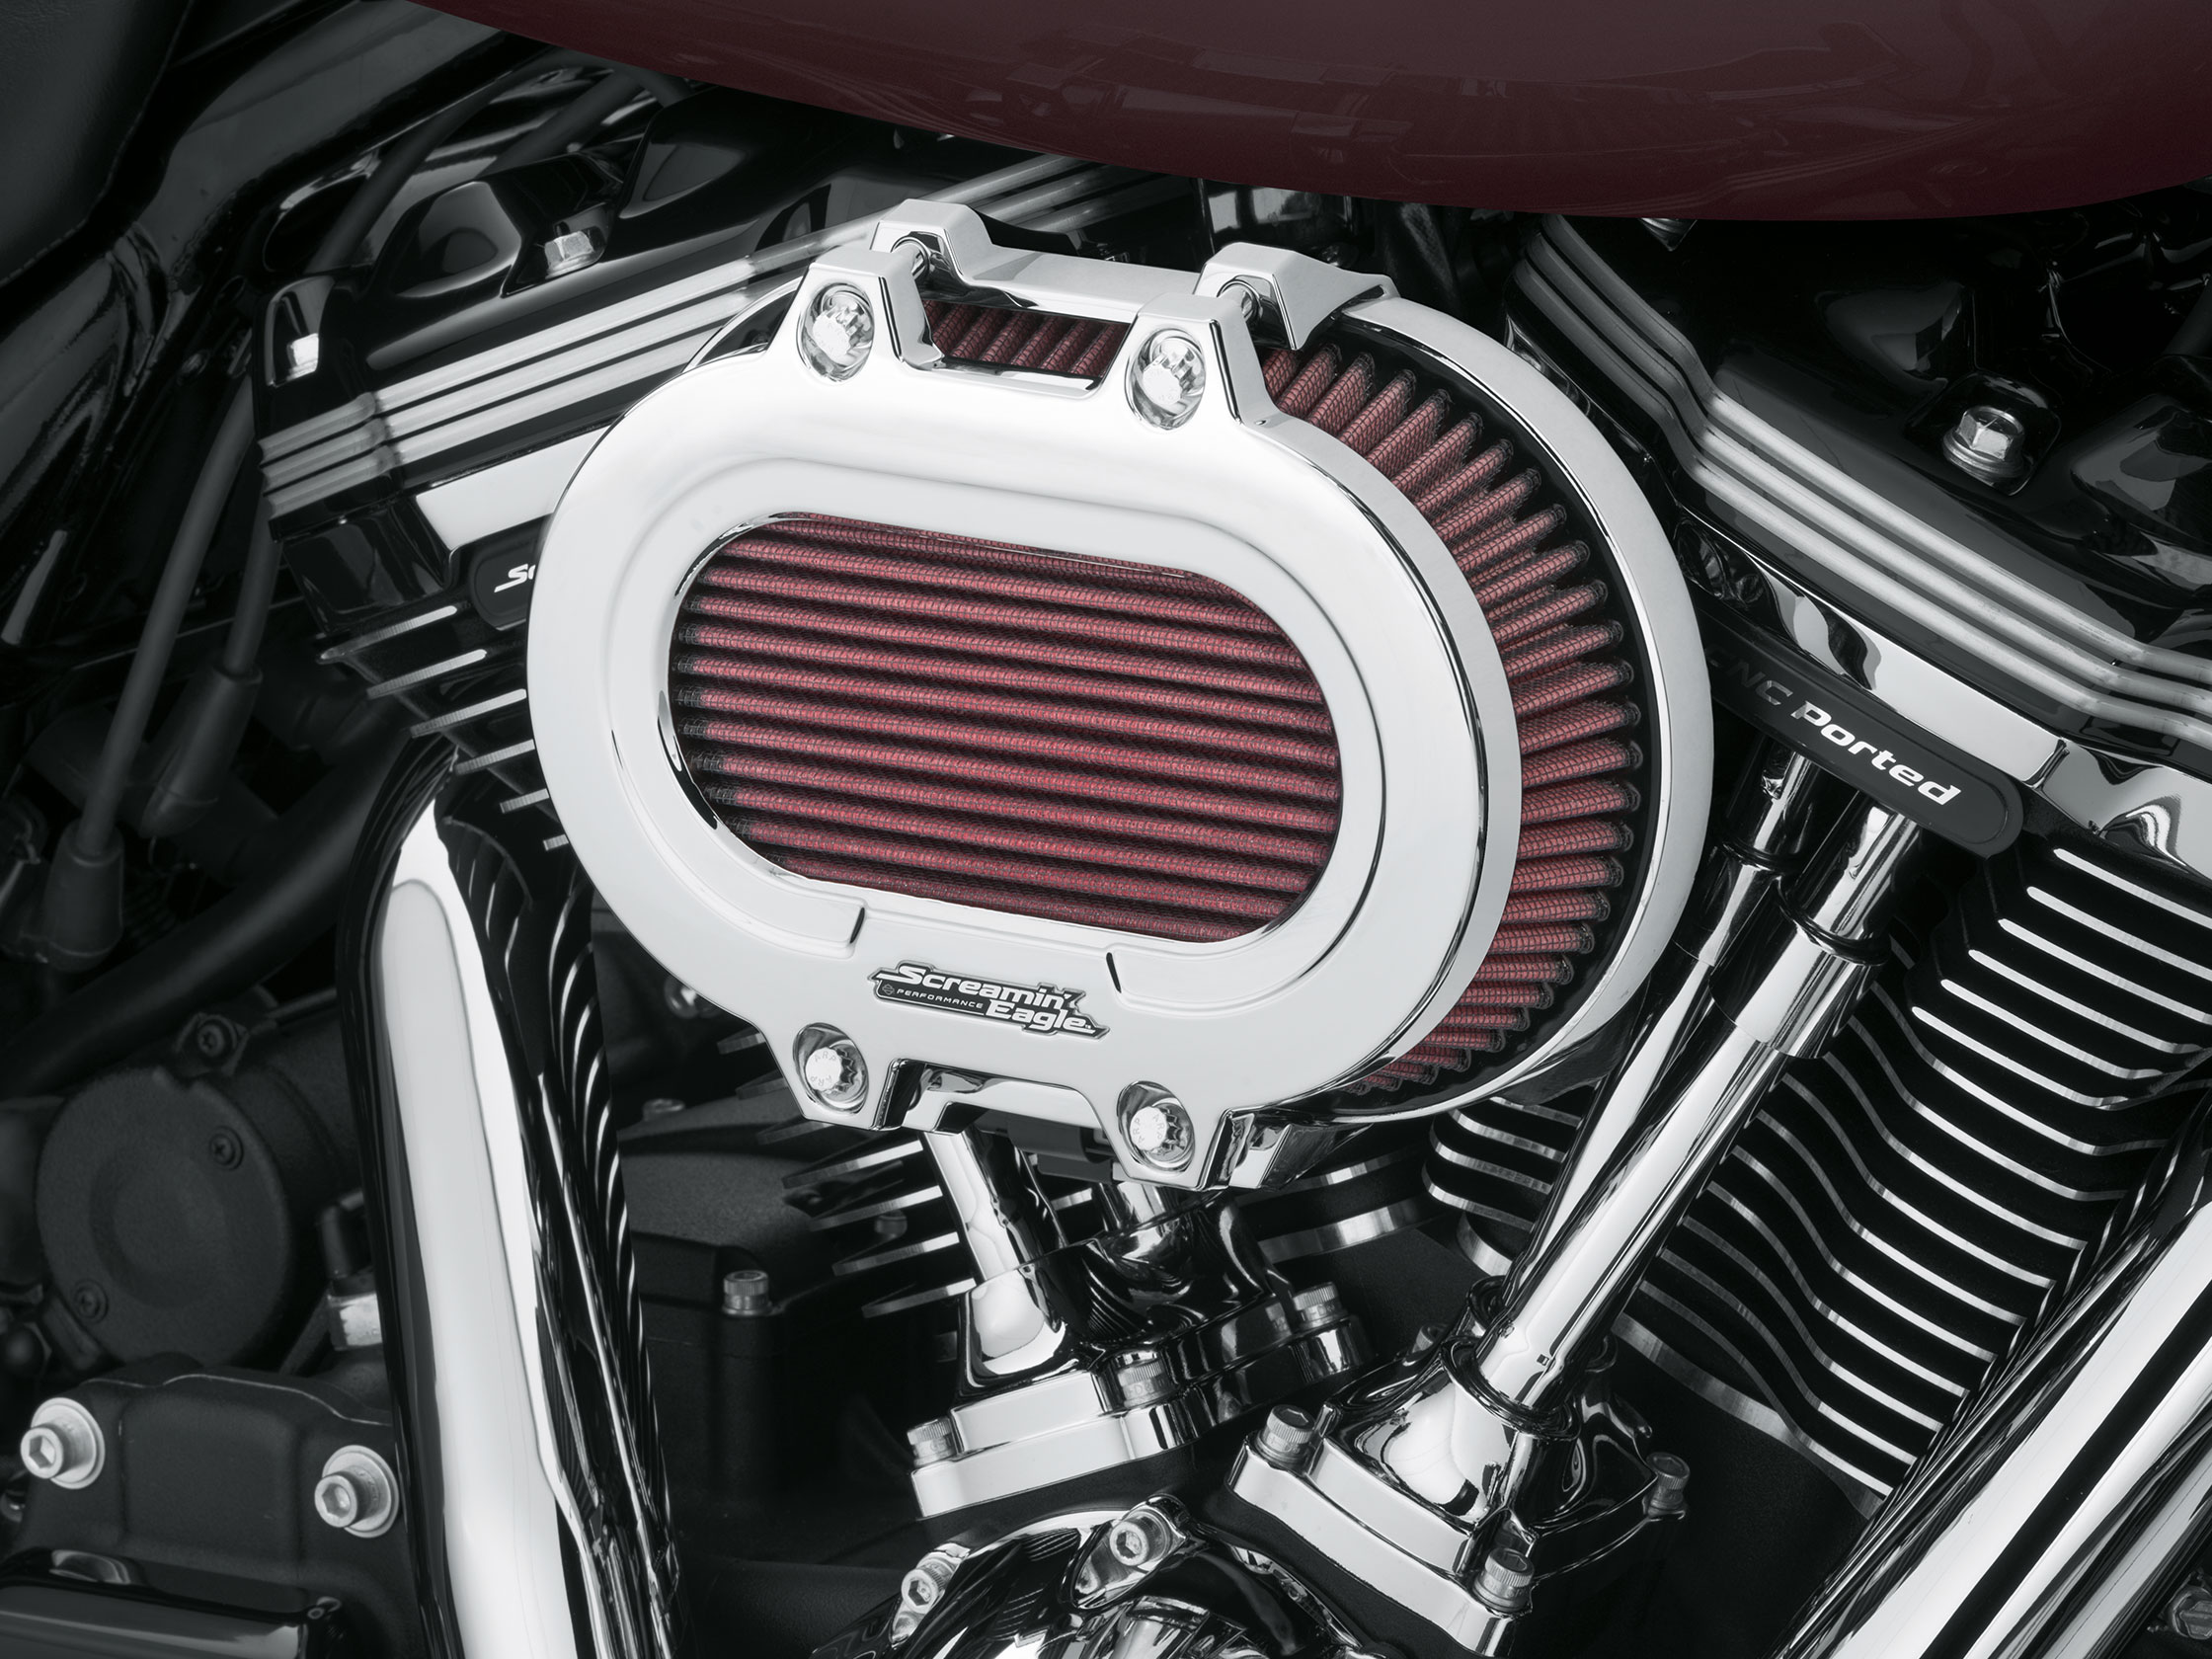 SCREAMIN' EAGLE® VENTILATOR<br />EXTREME AIR CLEANER Chrome 29400396  Milwaukee-eight Screamin´ eagle Parts  Accessories House-of-Flames  Harley-Davidson